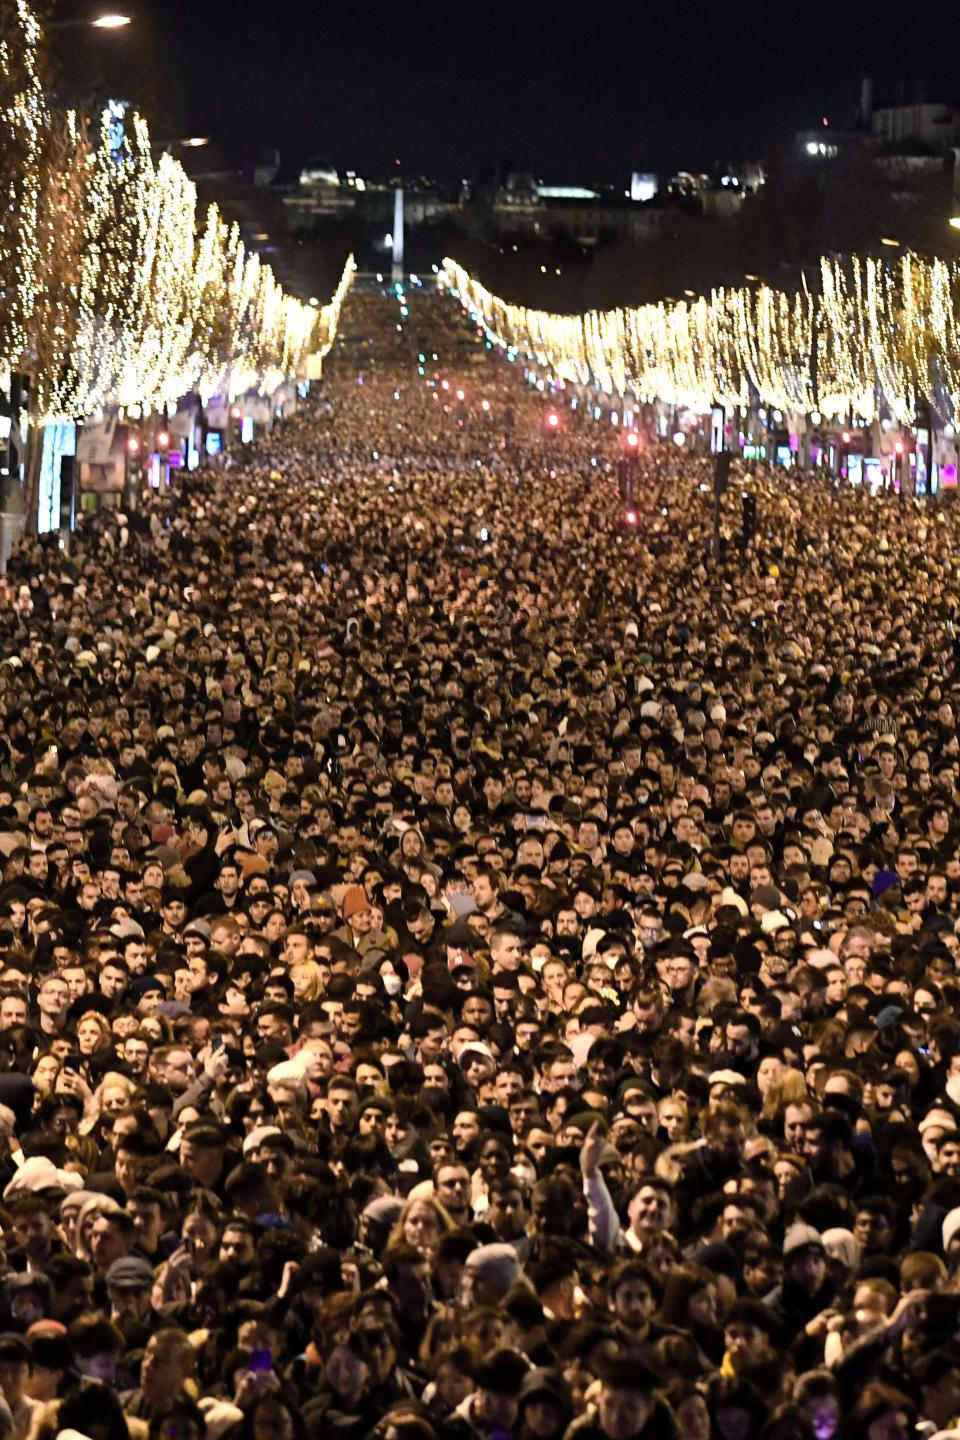 People gather on the Champs-Elysee as they wait for the New Year's Eve fireworks in Paris (AFP via Getty Images)